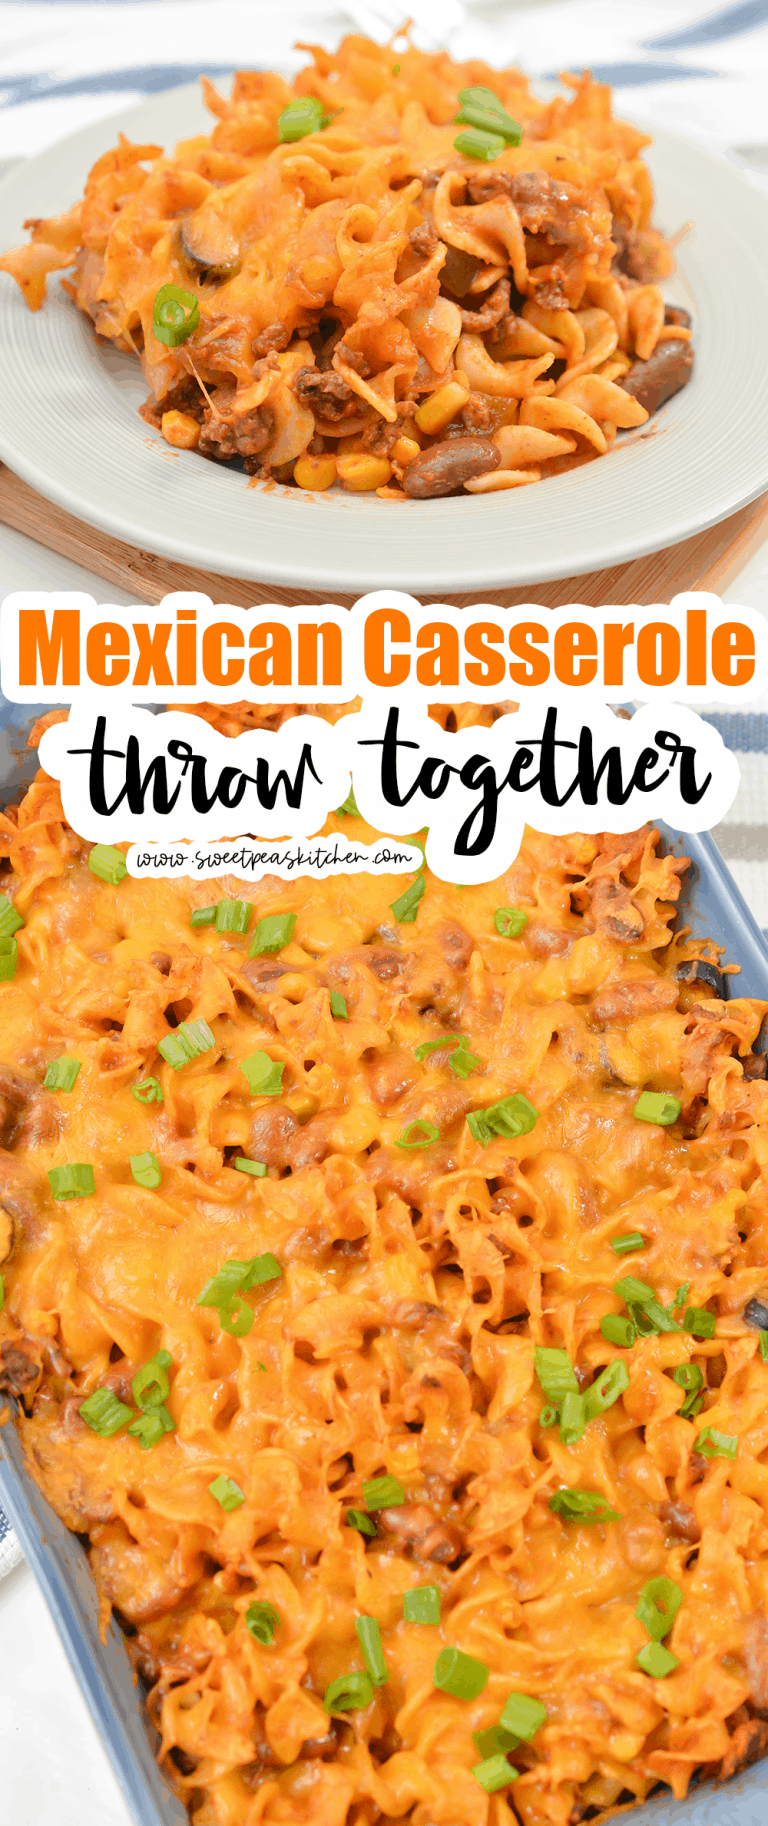 Throw Together Mexican Casserole - Sweet Pea's Kitchen